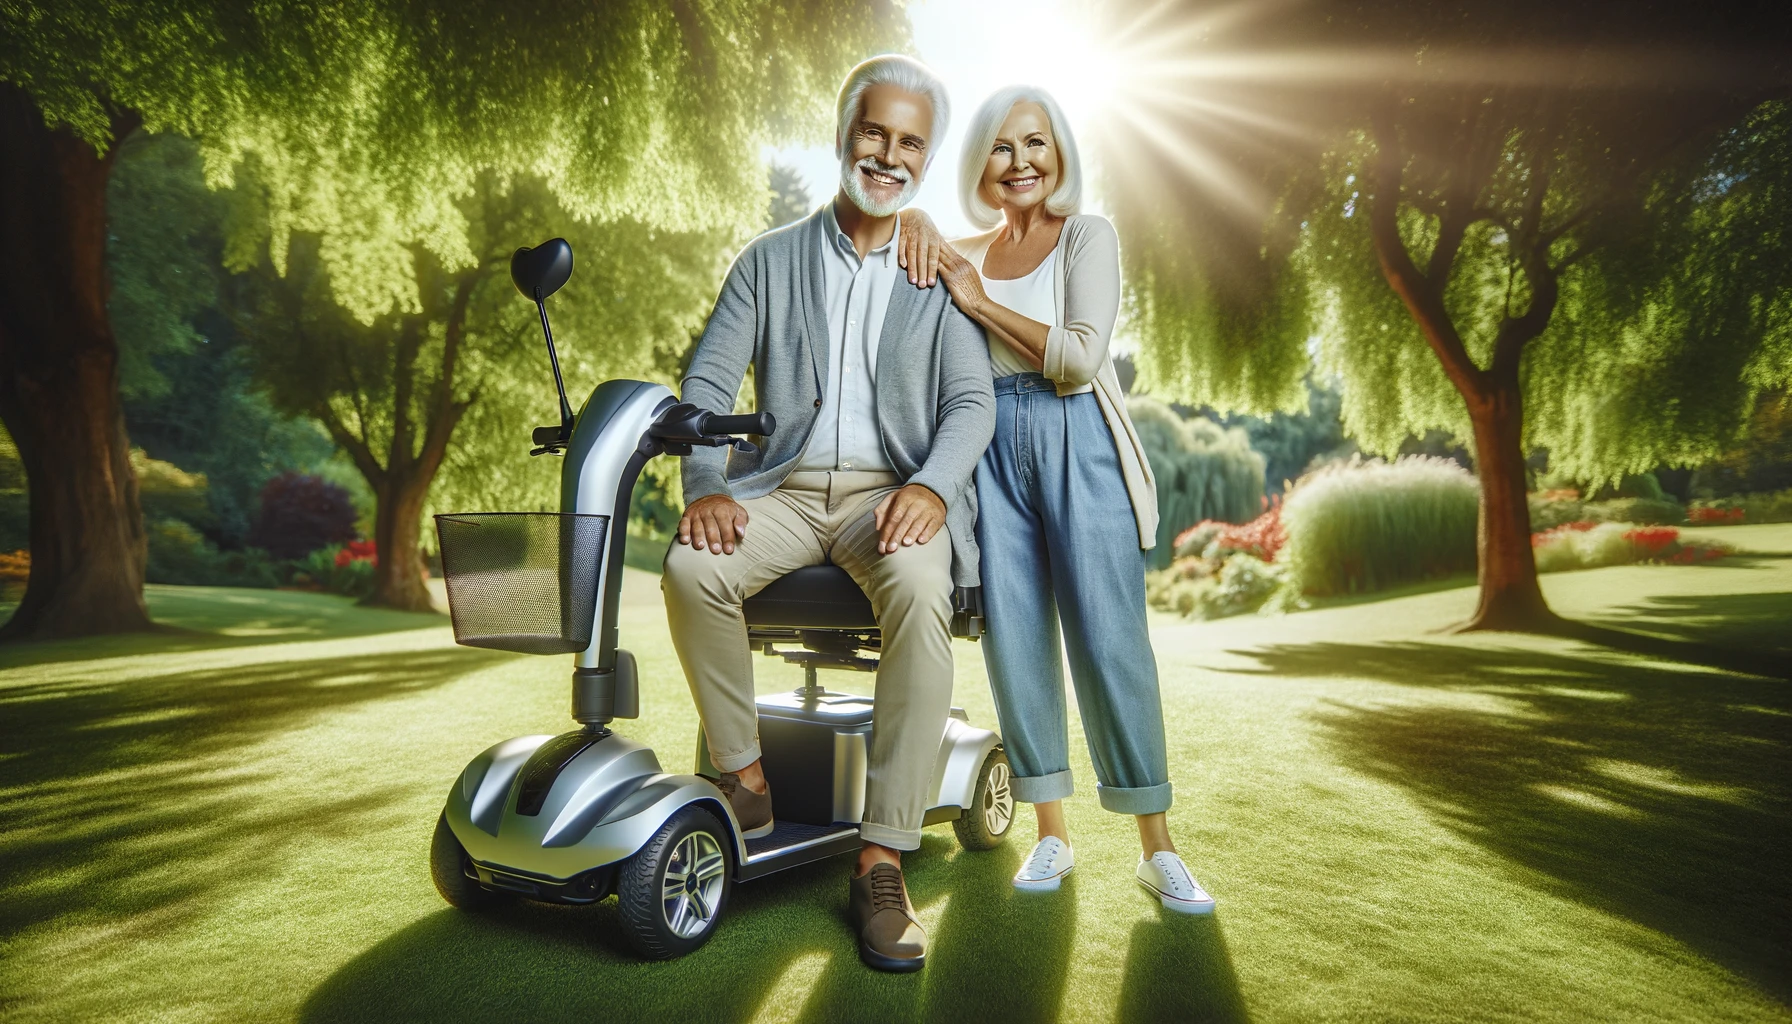 Get a Free Mobility Scooter Now!